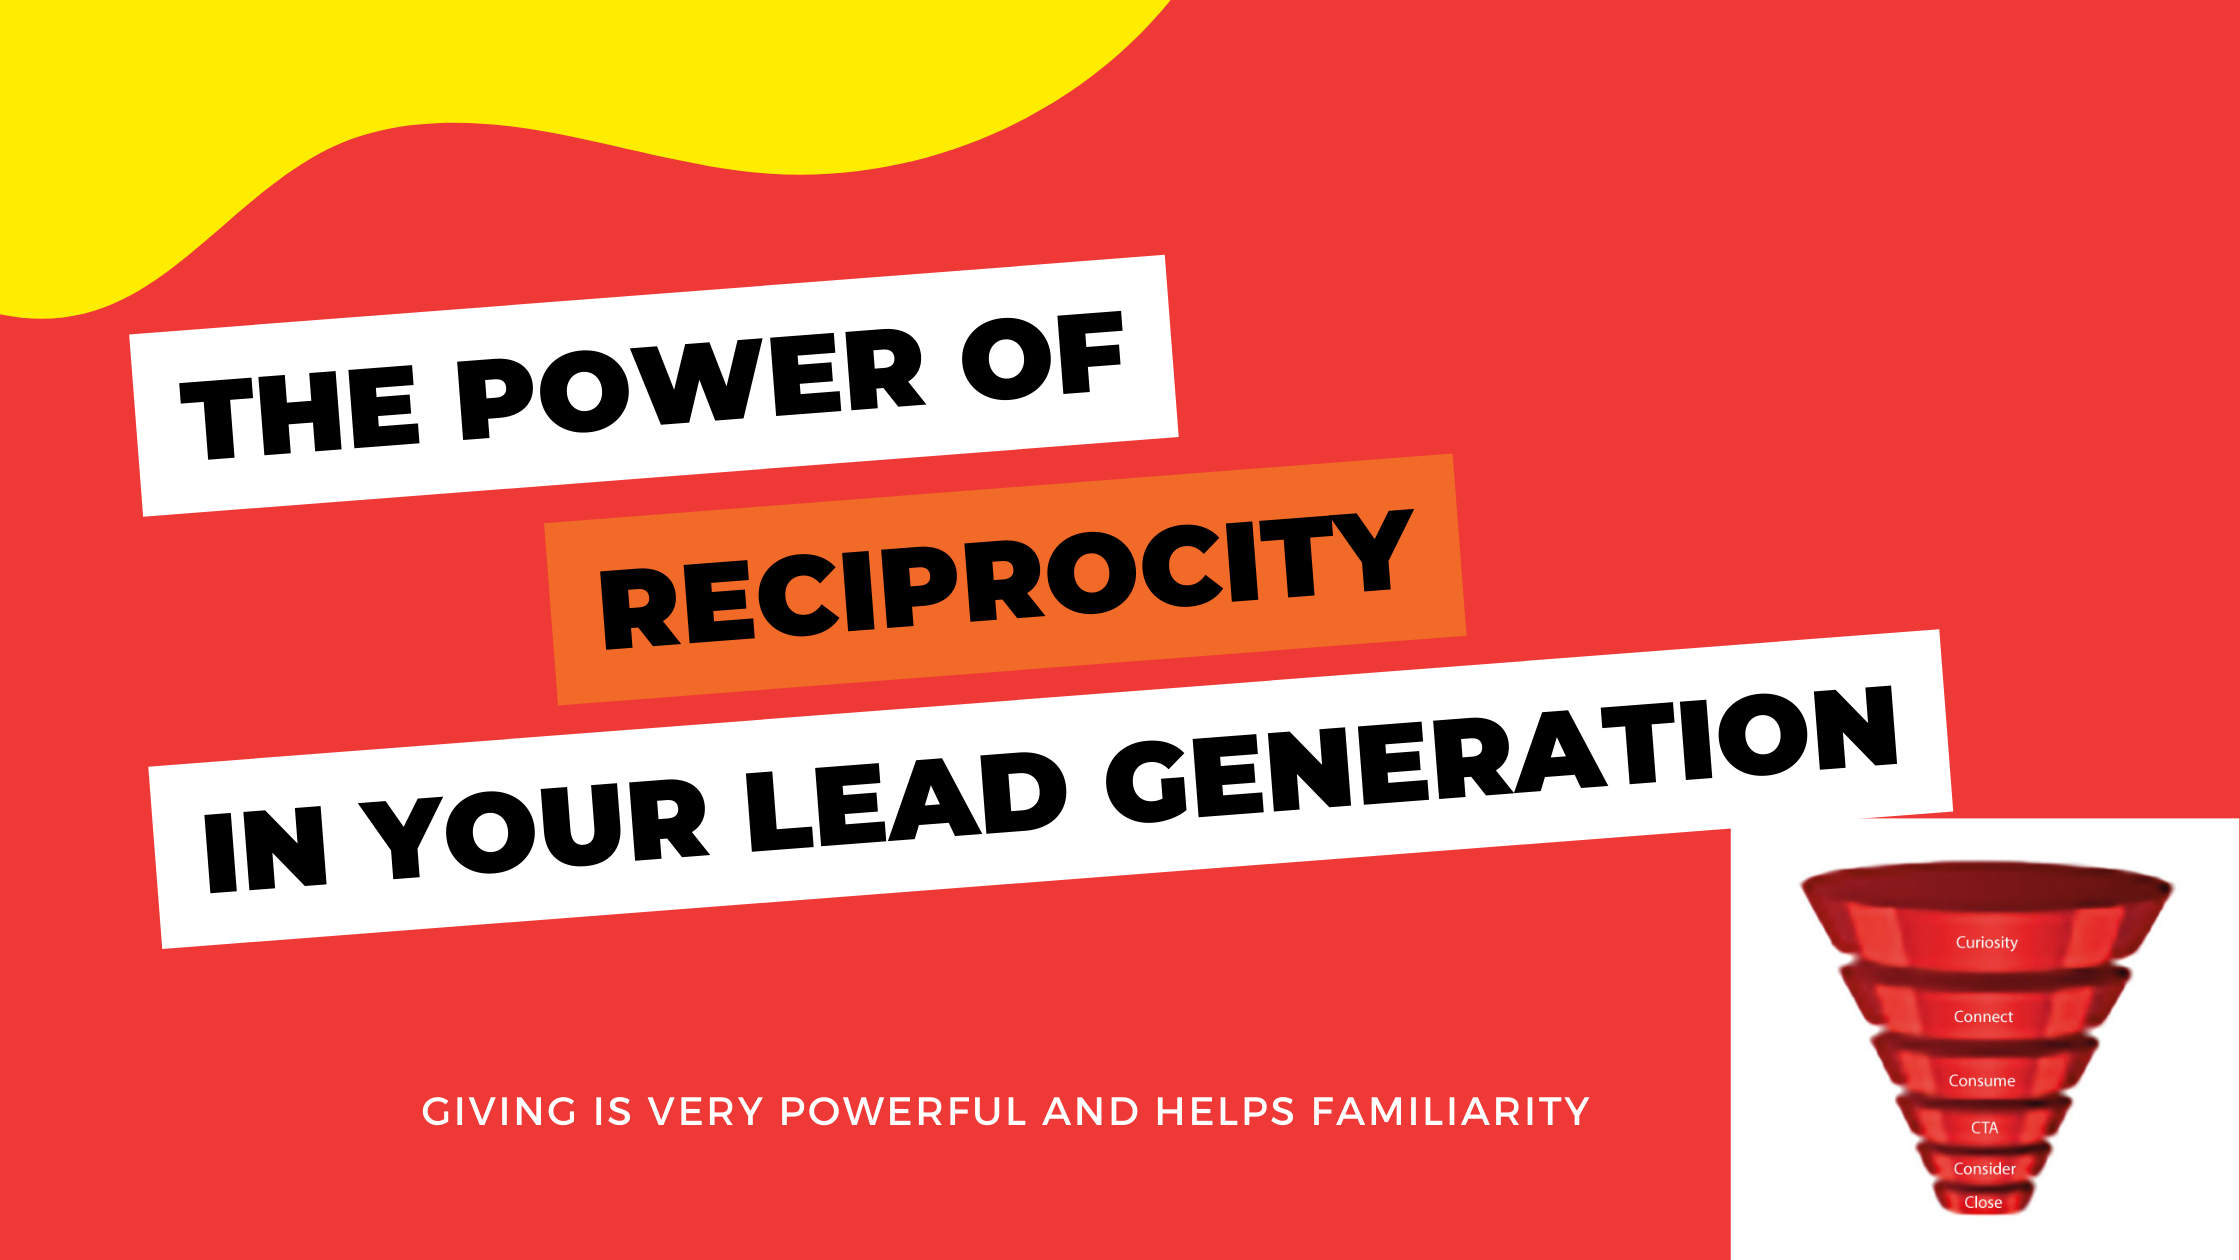 Reciprocity is so powerful in your lead generation - your network really is your networth